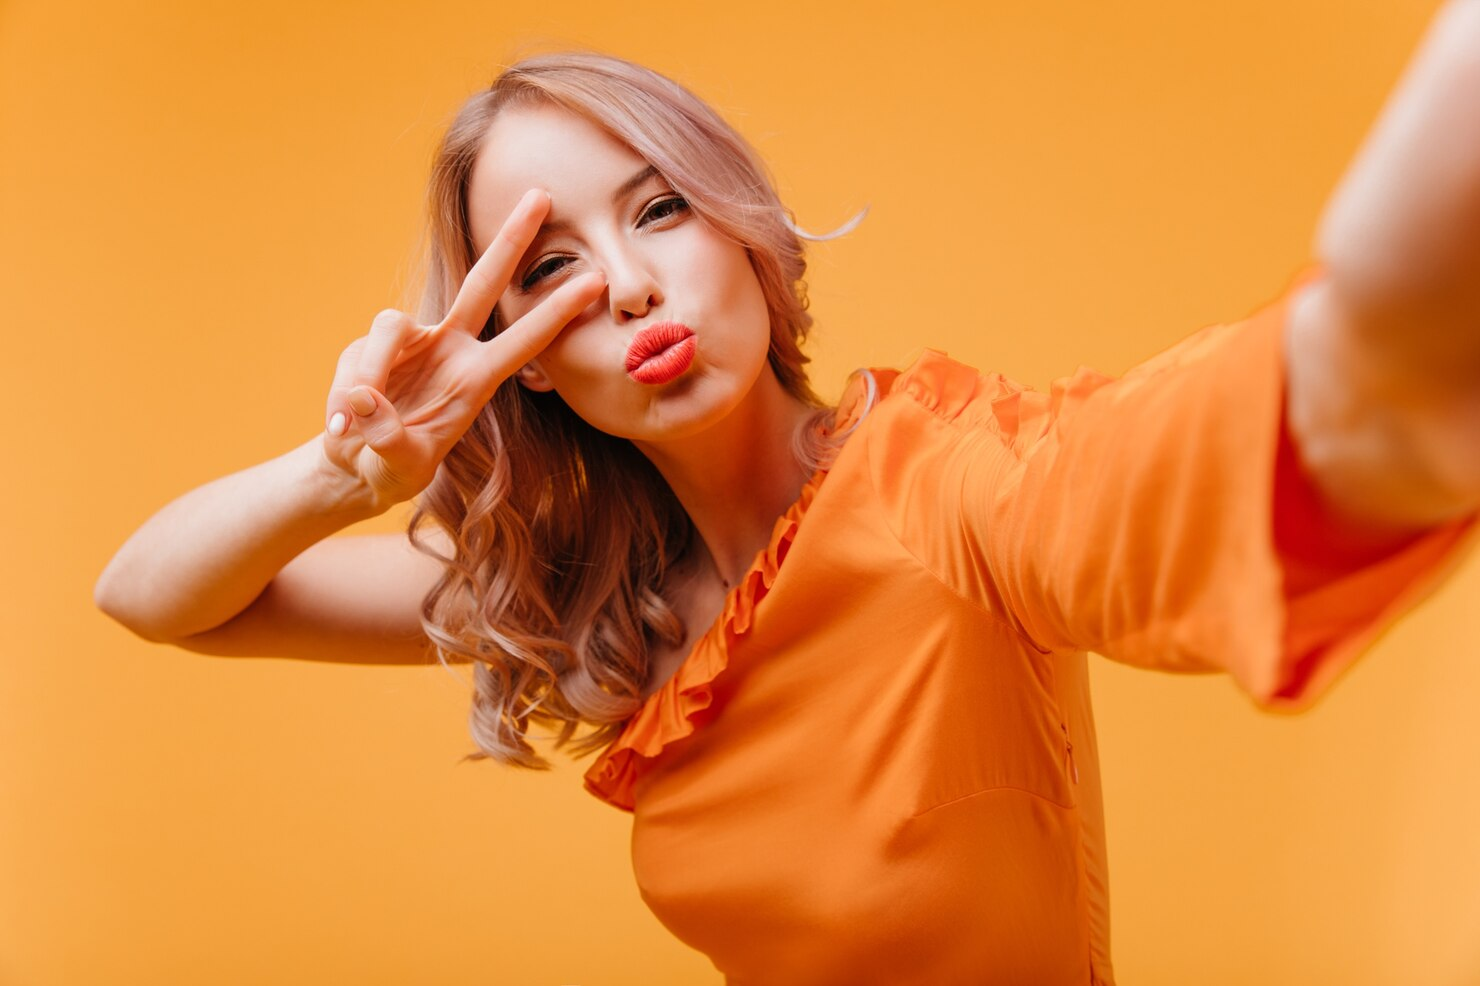 A woman in orange dress making a victory sign and a pout.